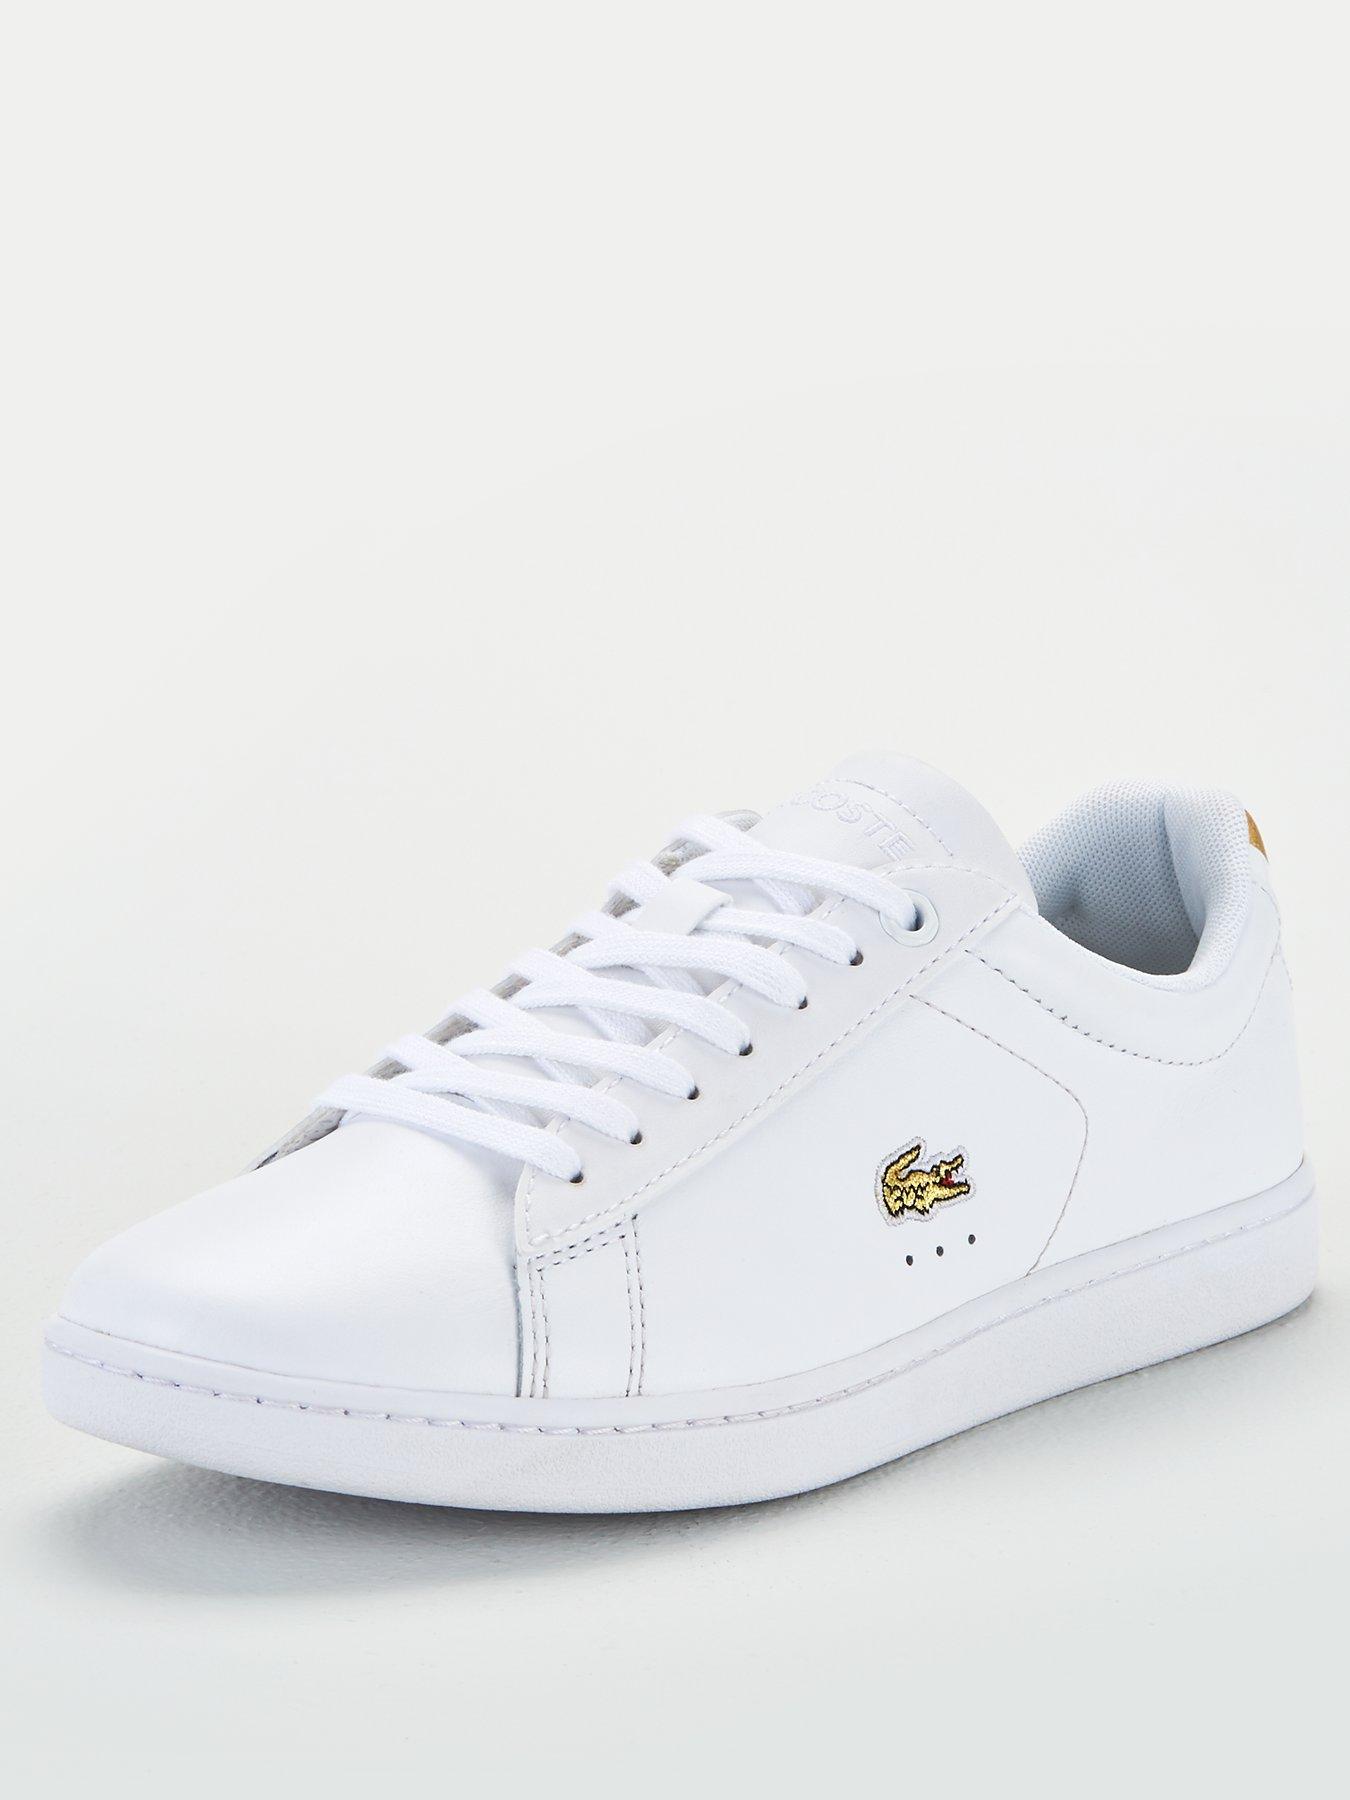 lacoste white shoes gold logo